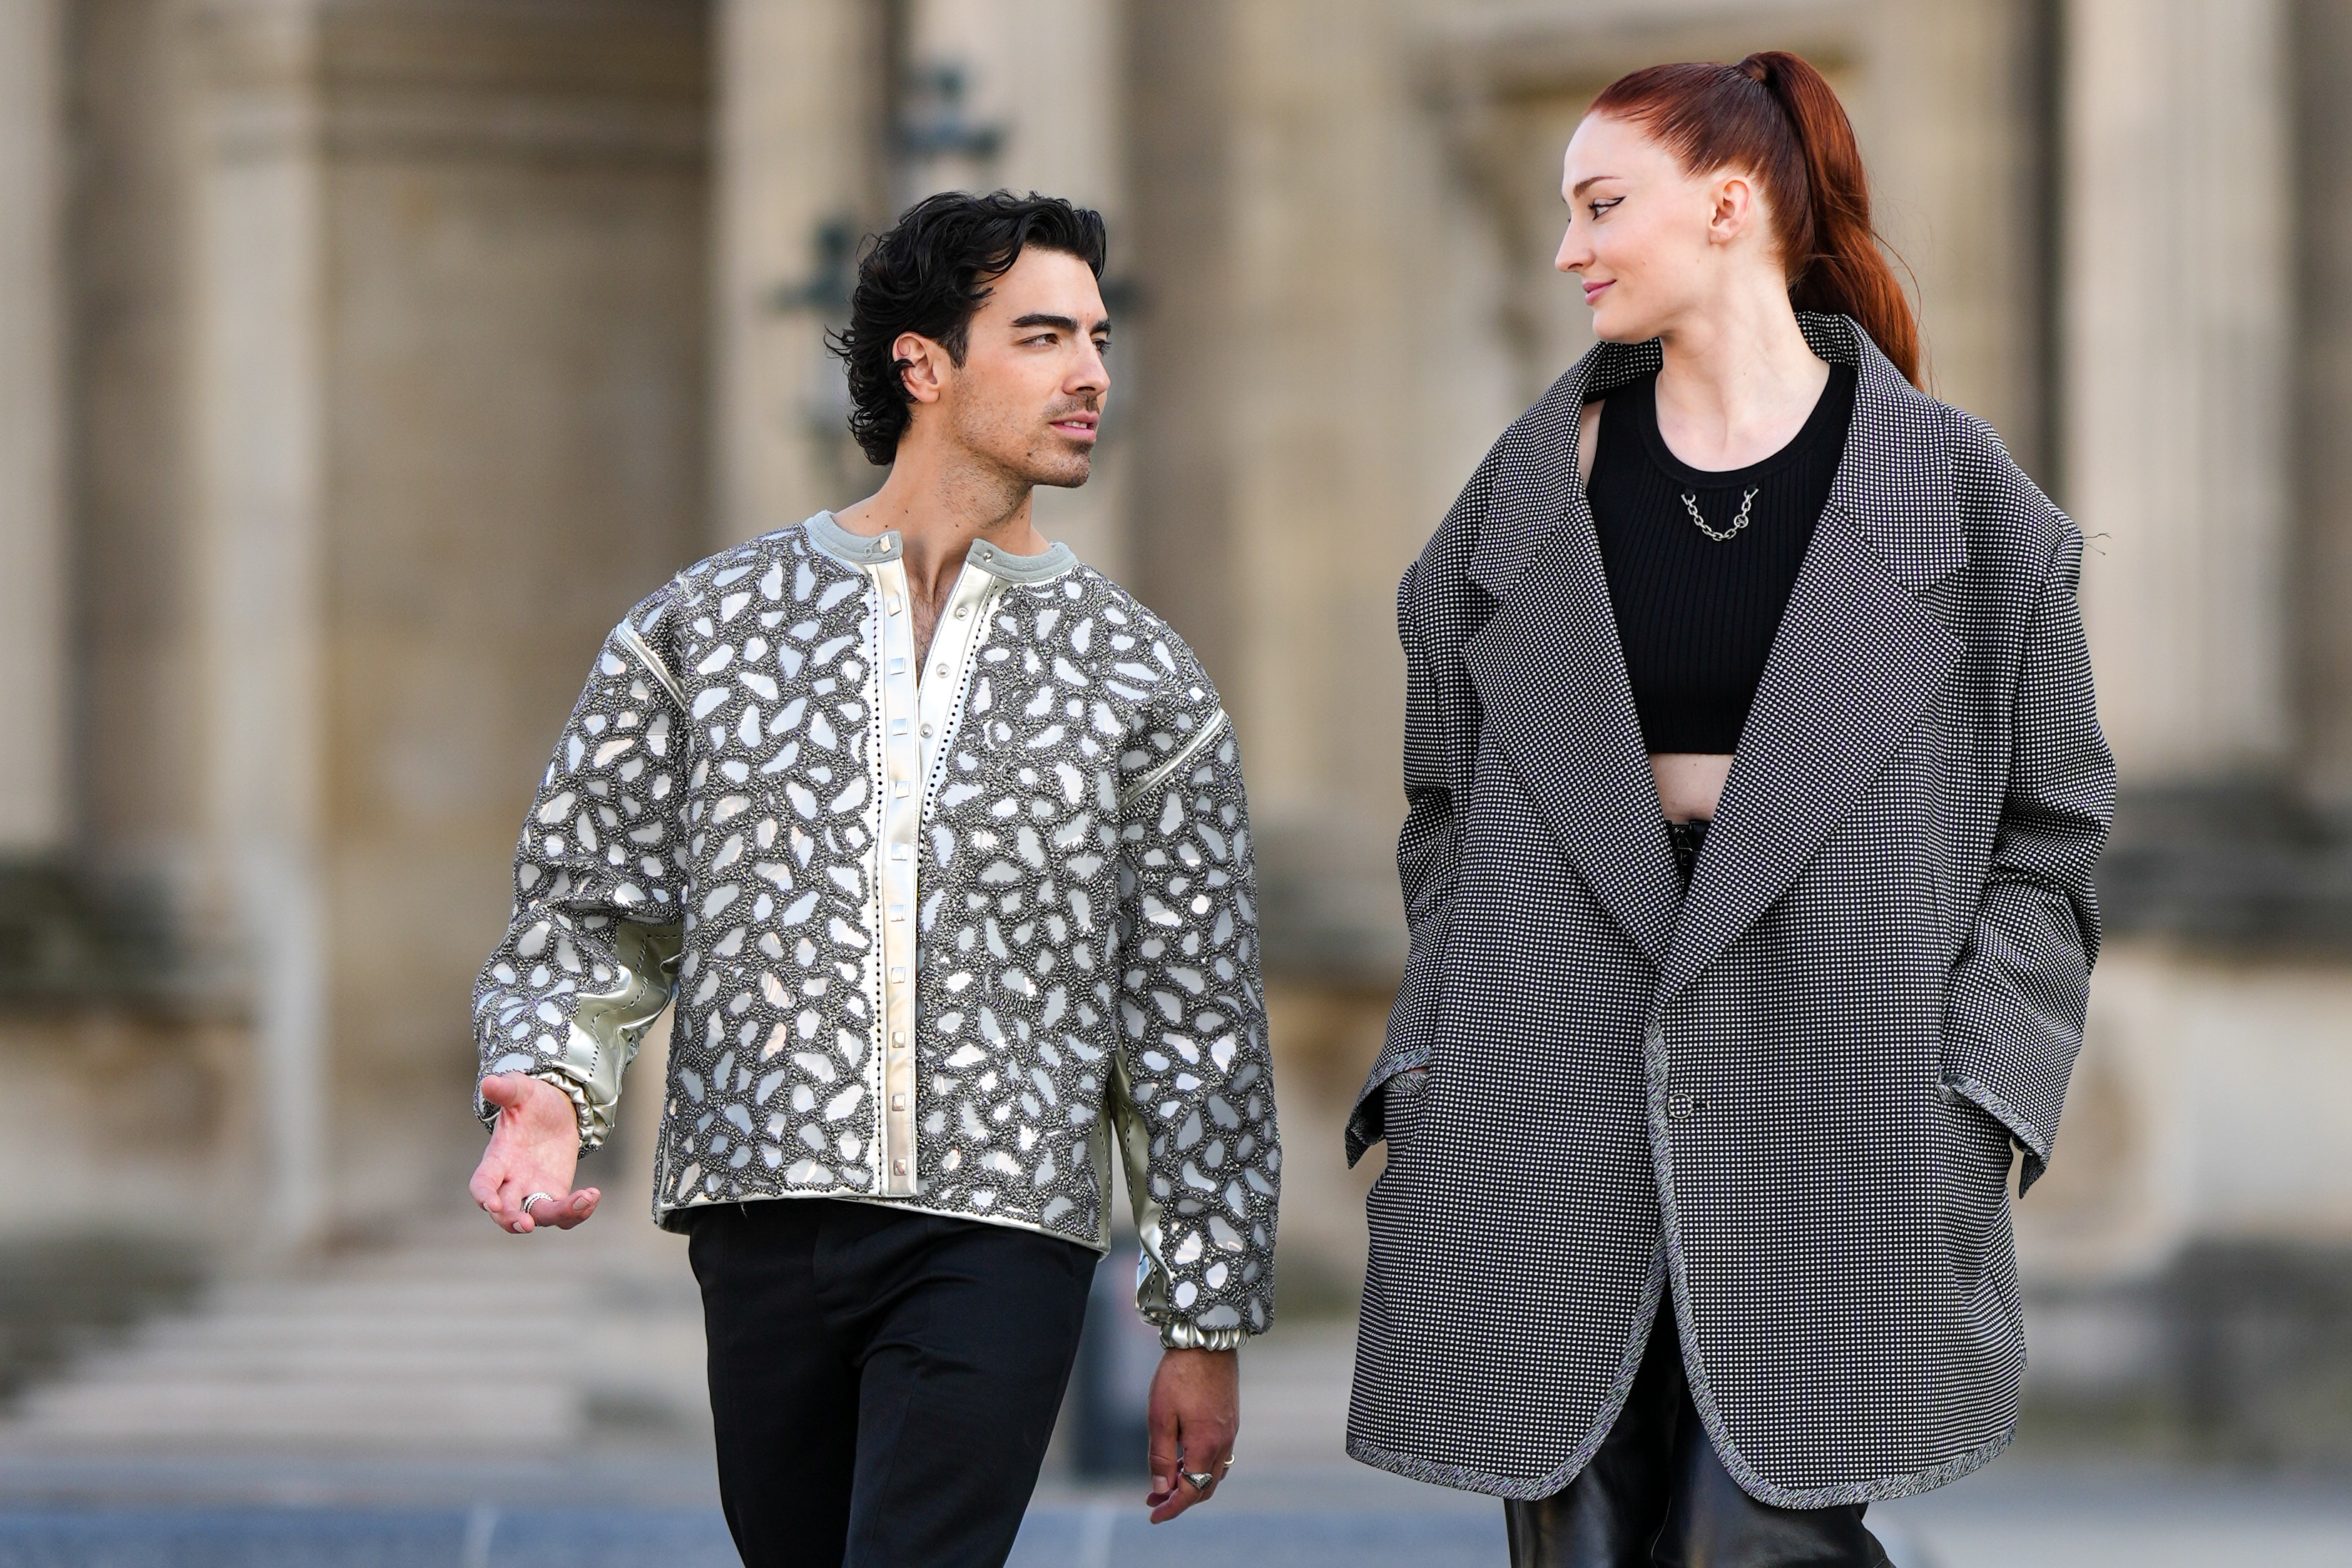 Close-up of Joe and Sophie walking together and wearing jackets